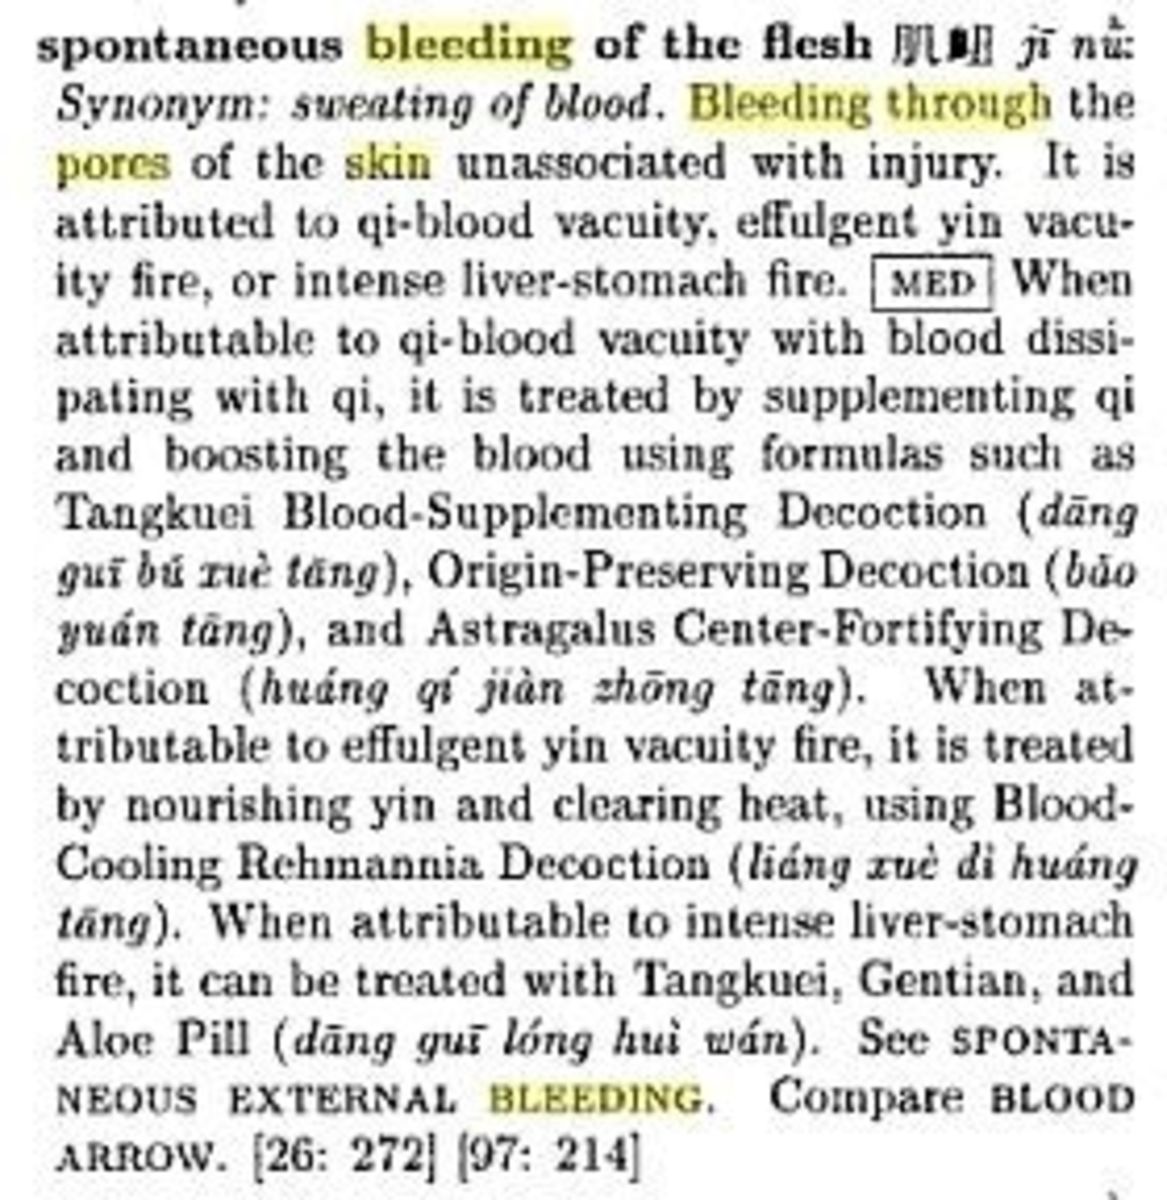 Advice from a Book on Chinese Medicine: Herbal Treatment for "Spontaneous Bleeding of the Flesh."